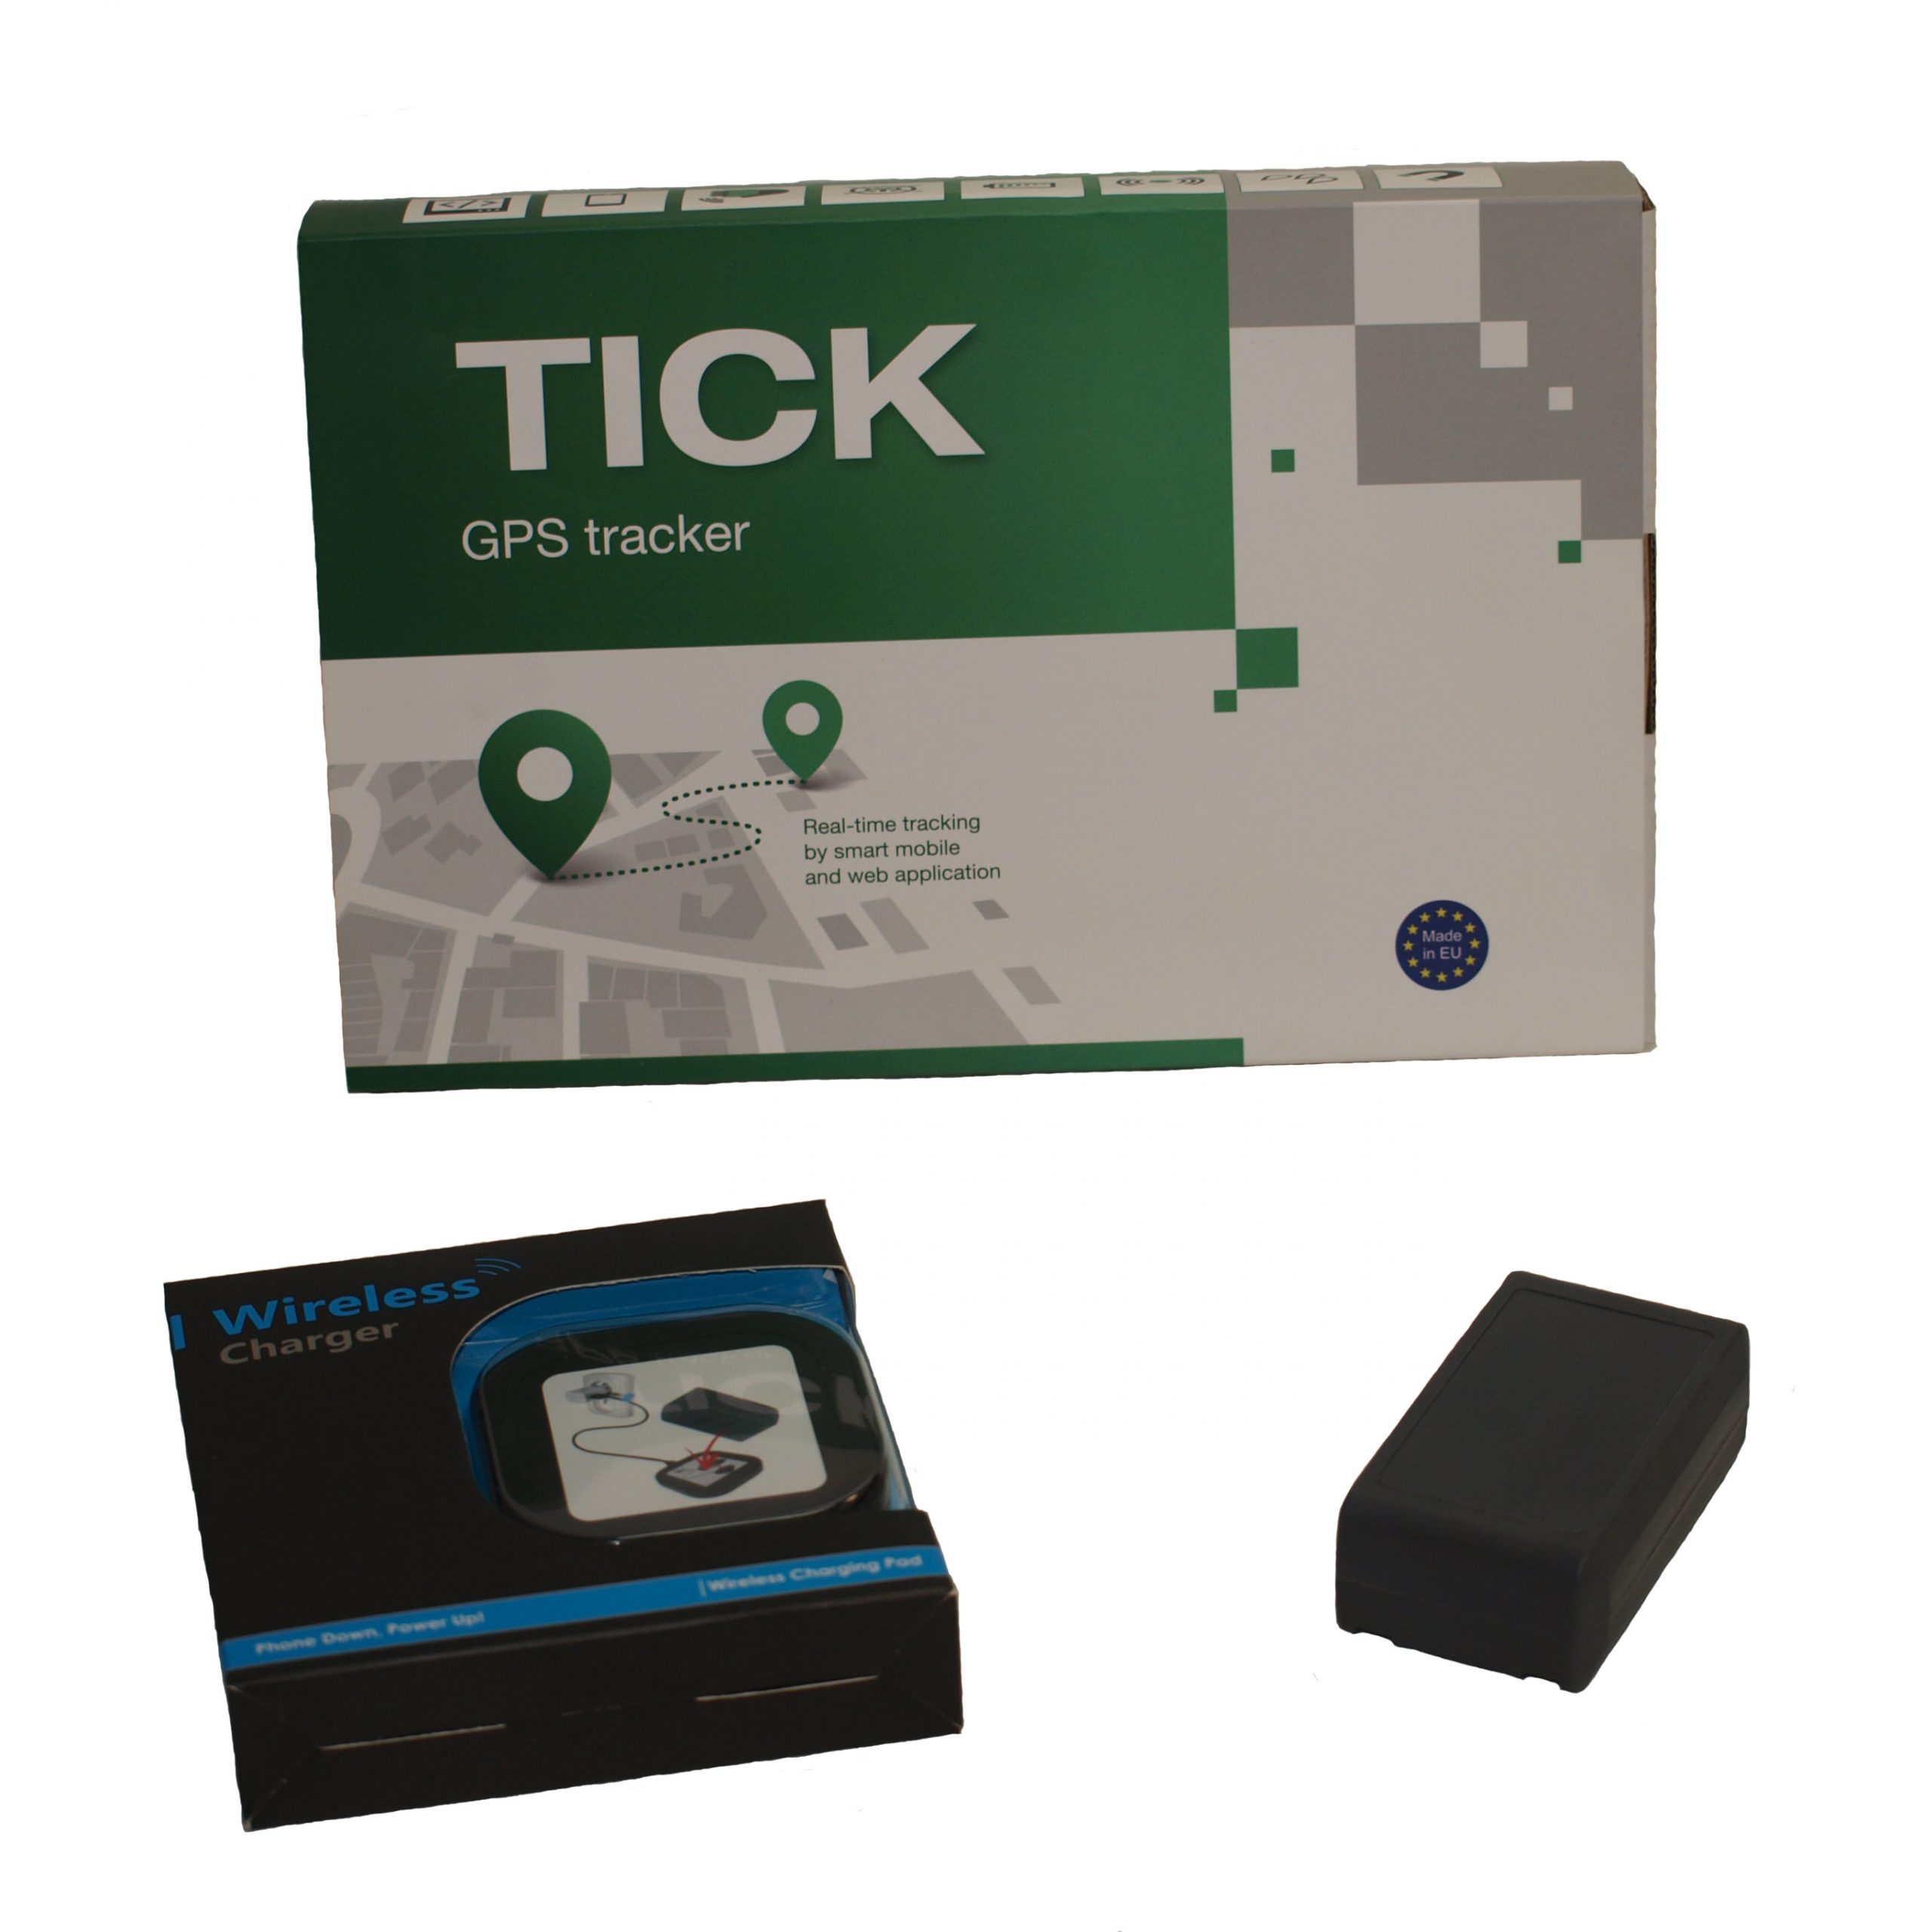 Product Image of Tick Tracker